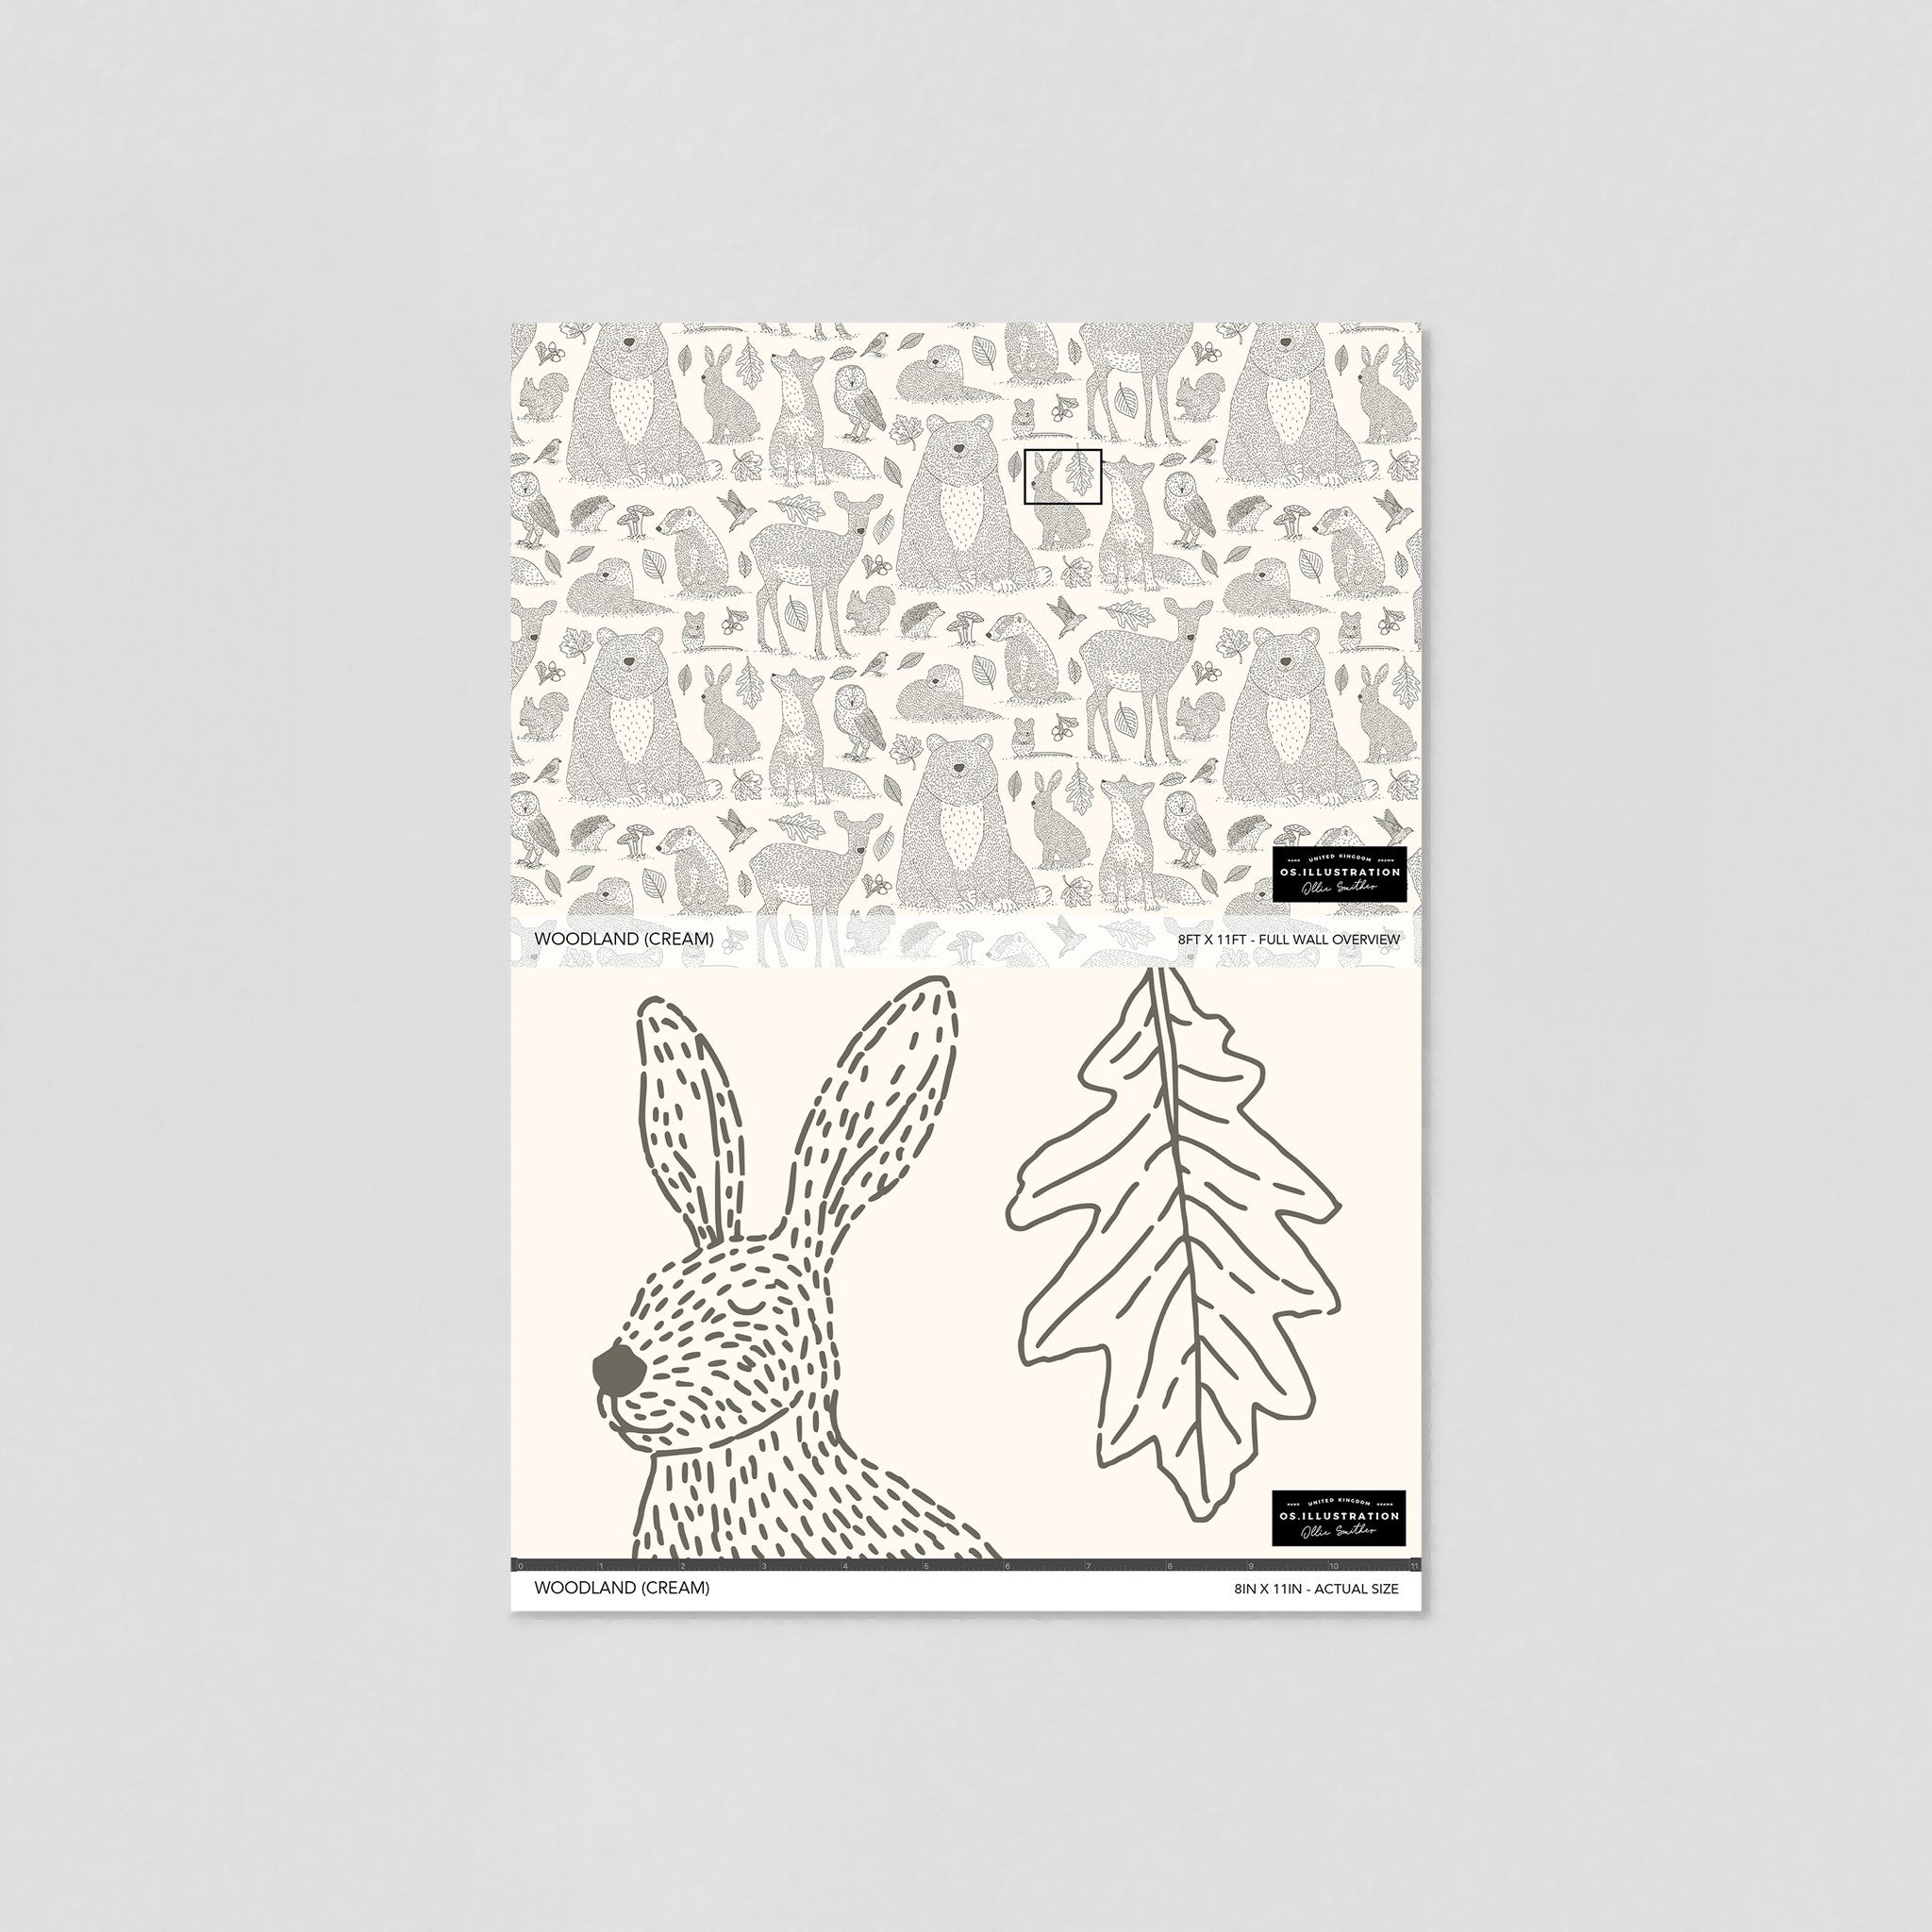 "Wall Blush's Woodland (Cream) Wallpaper sample with animal designs for a cozy modern living room decor."